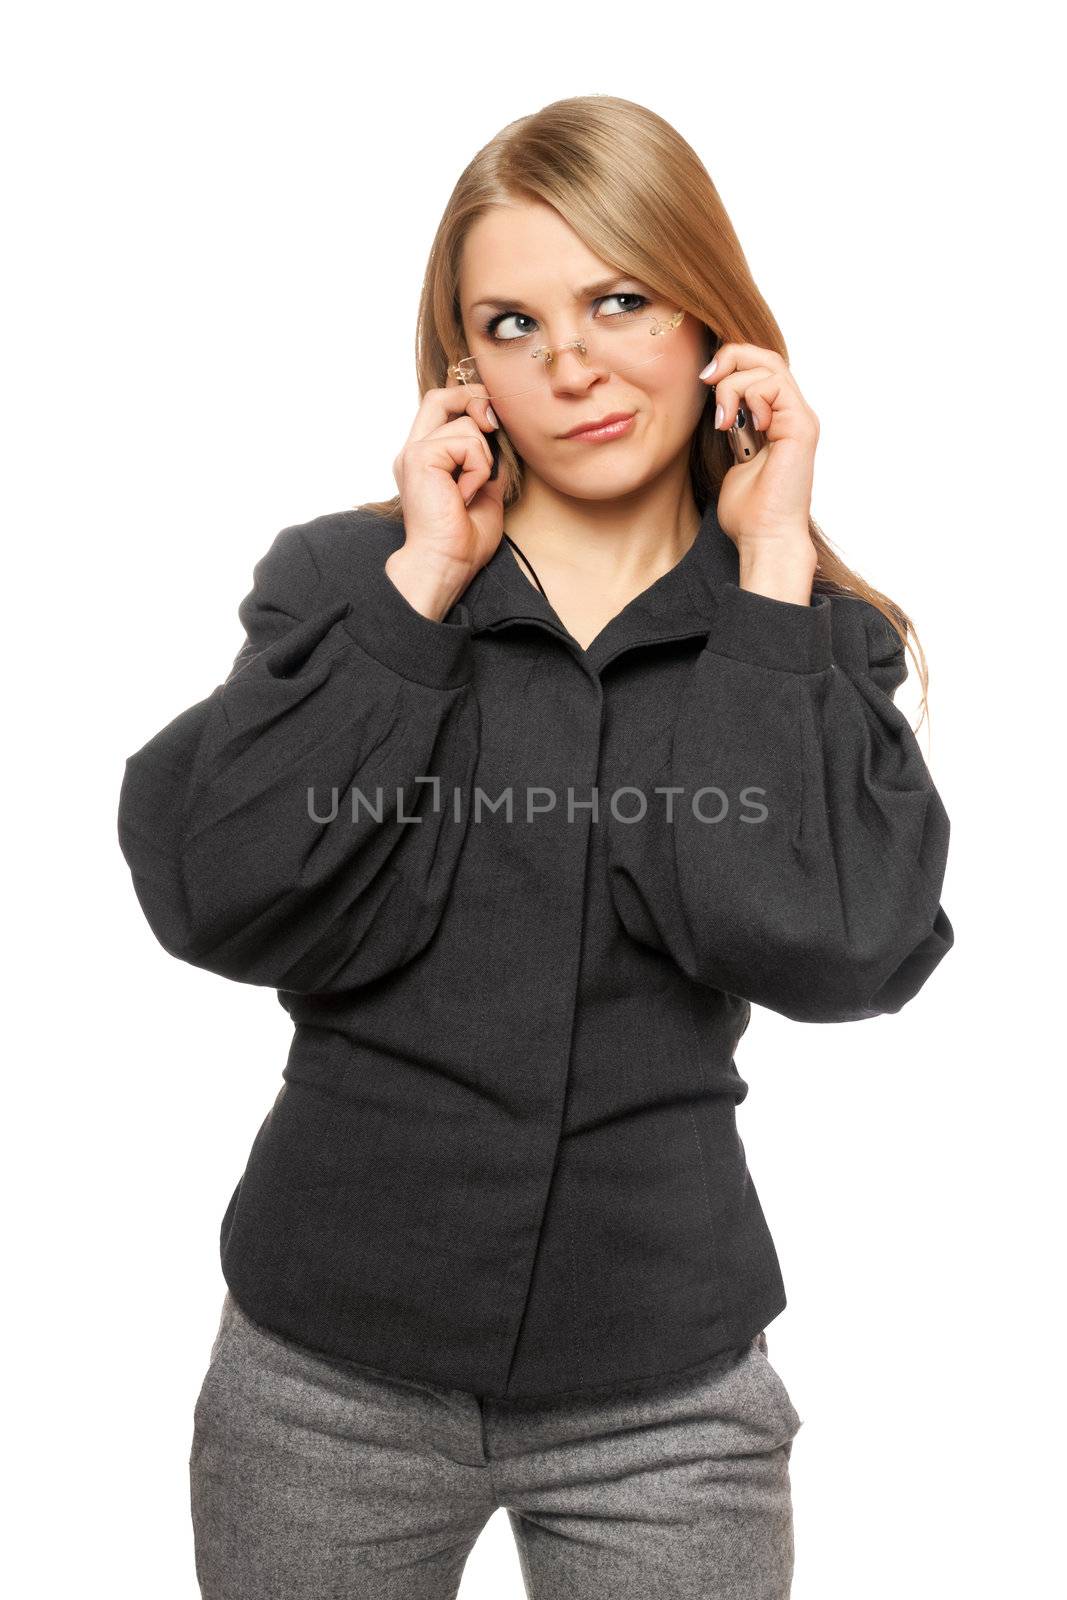 Discontented young blonde in a gray business suit with two phones